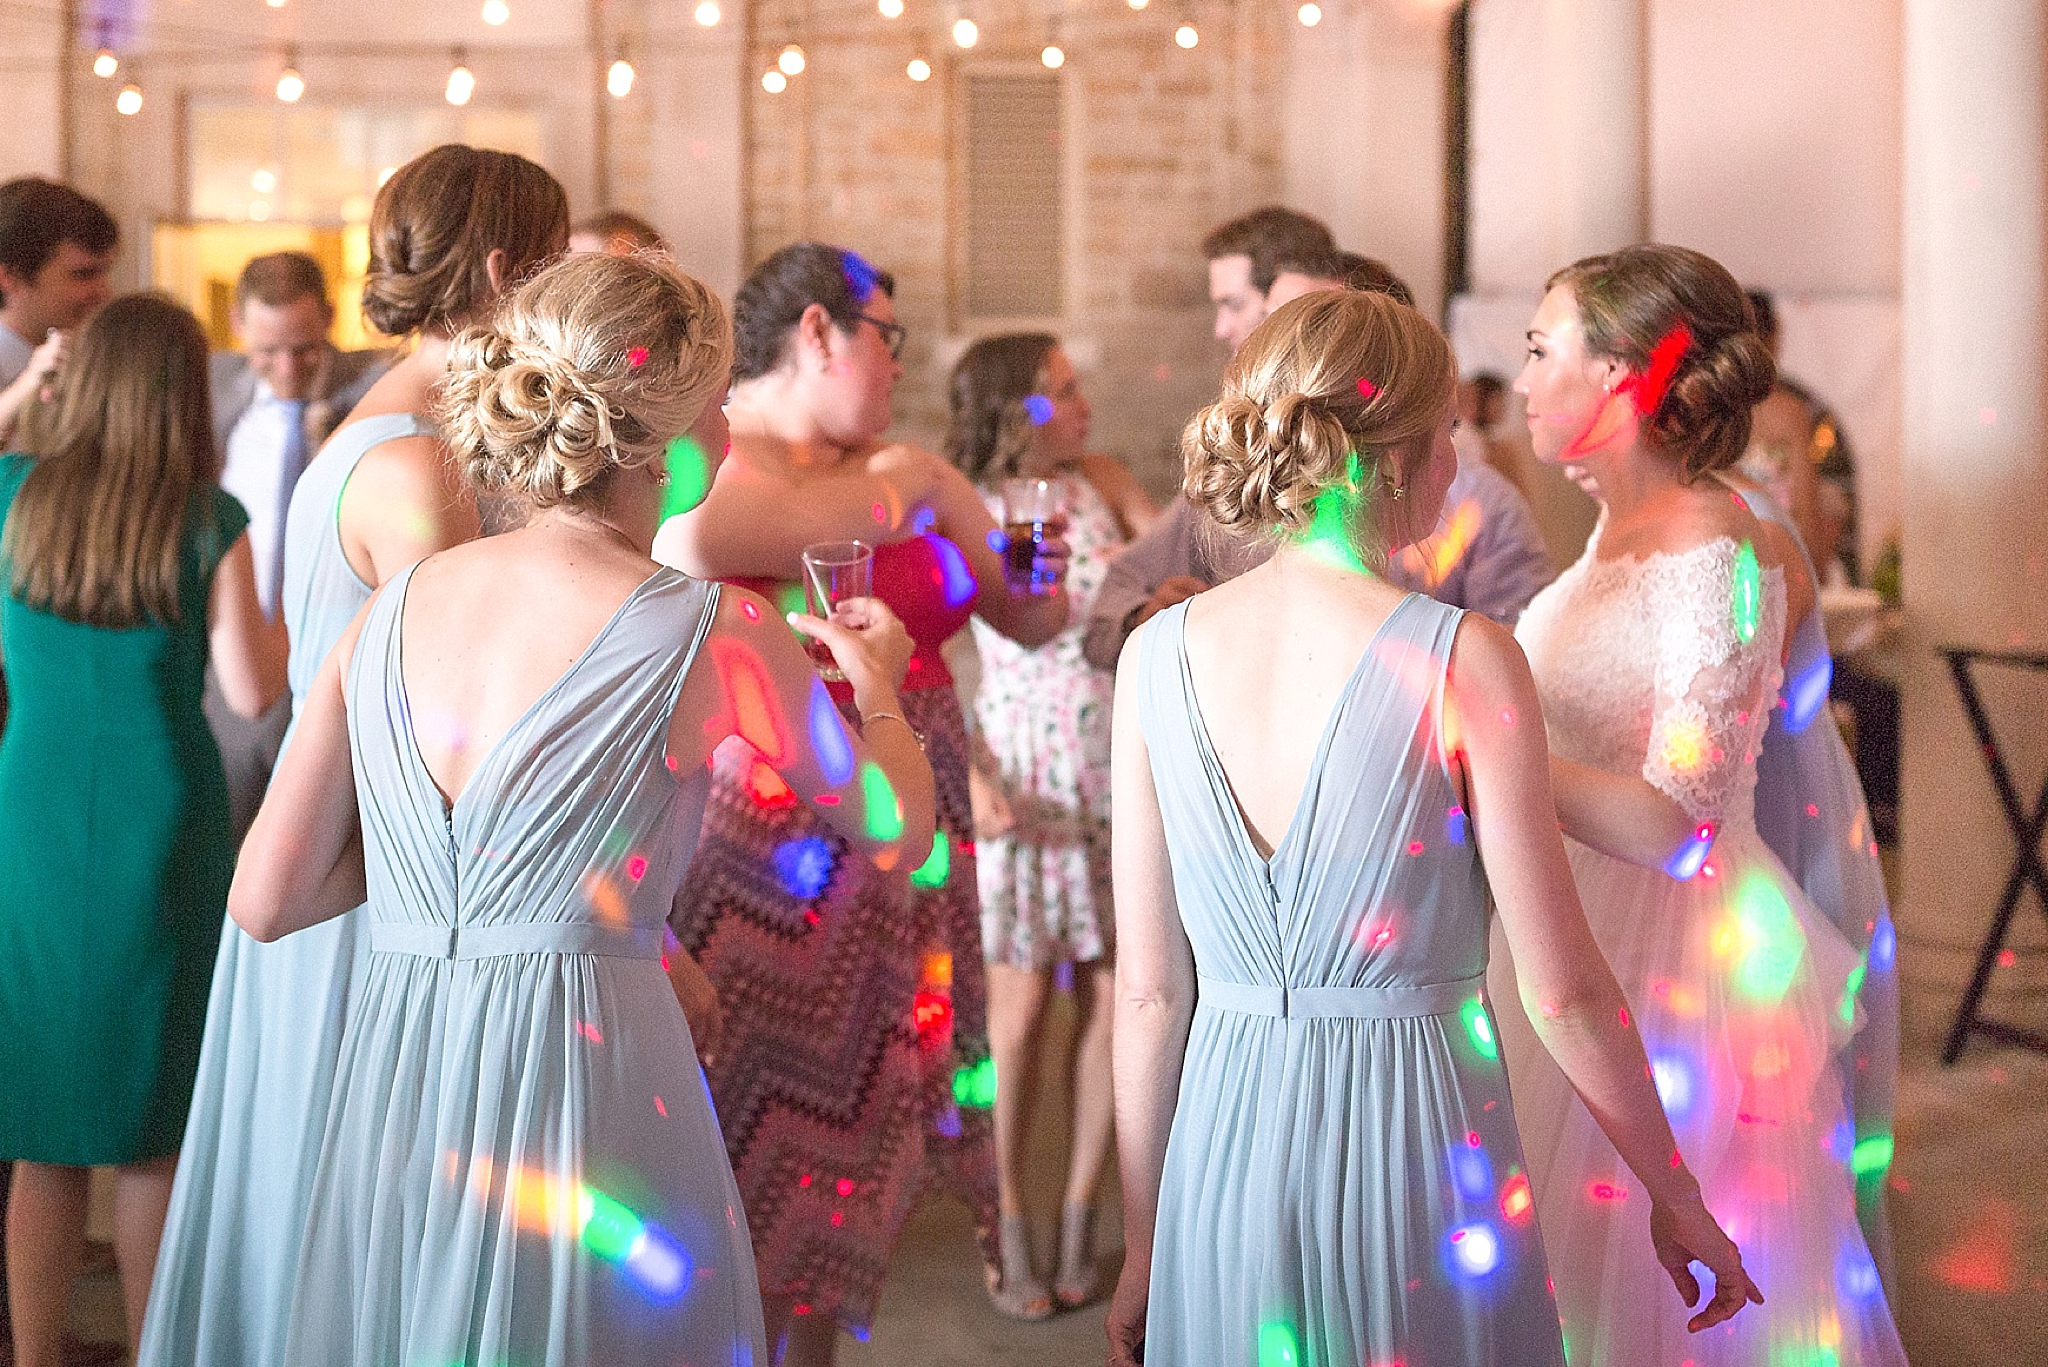 One DC wedding photographer shares tips for future brides and grooms to consider when planning their reception lighting. 